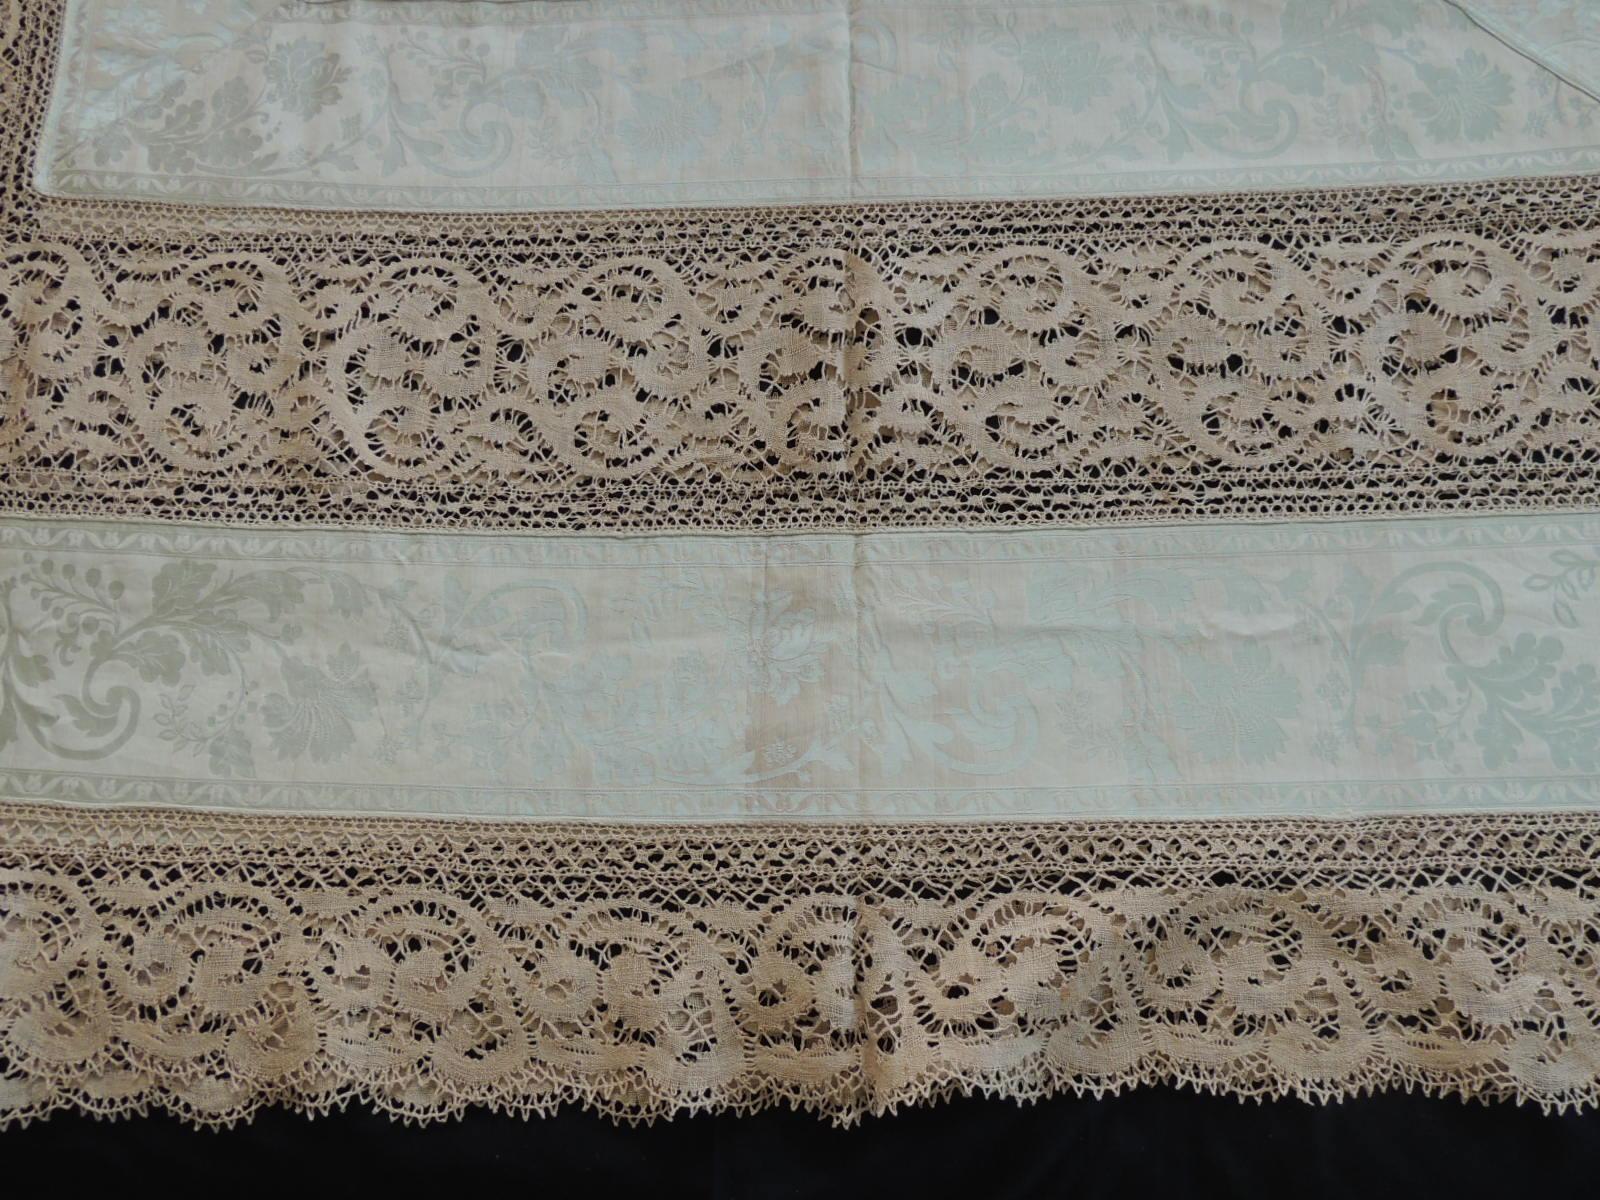 Bobbin Lace and Damask Bed Topper with Large Lace Center Panel 1